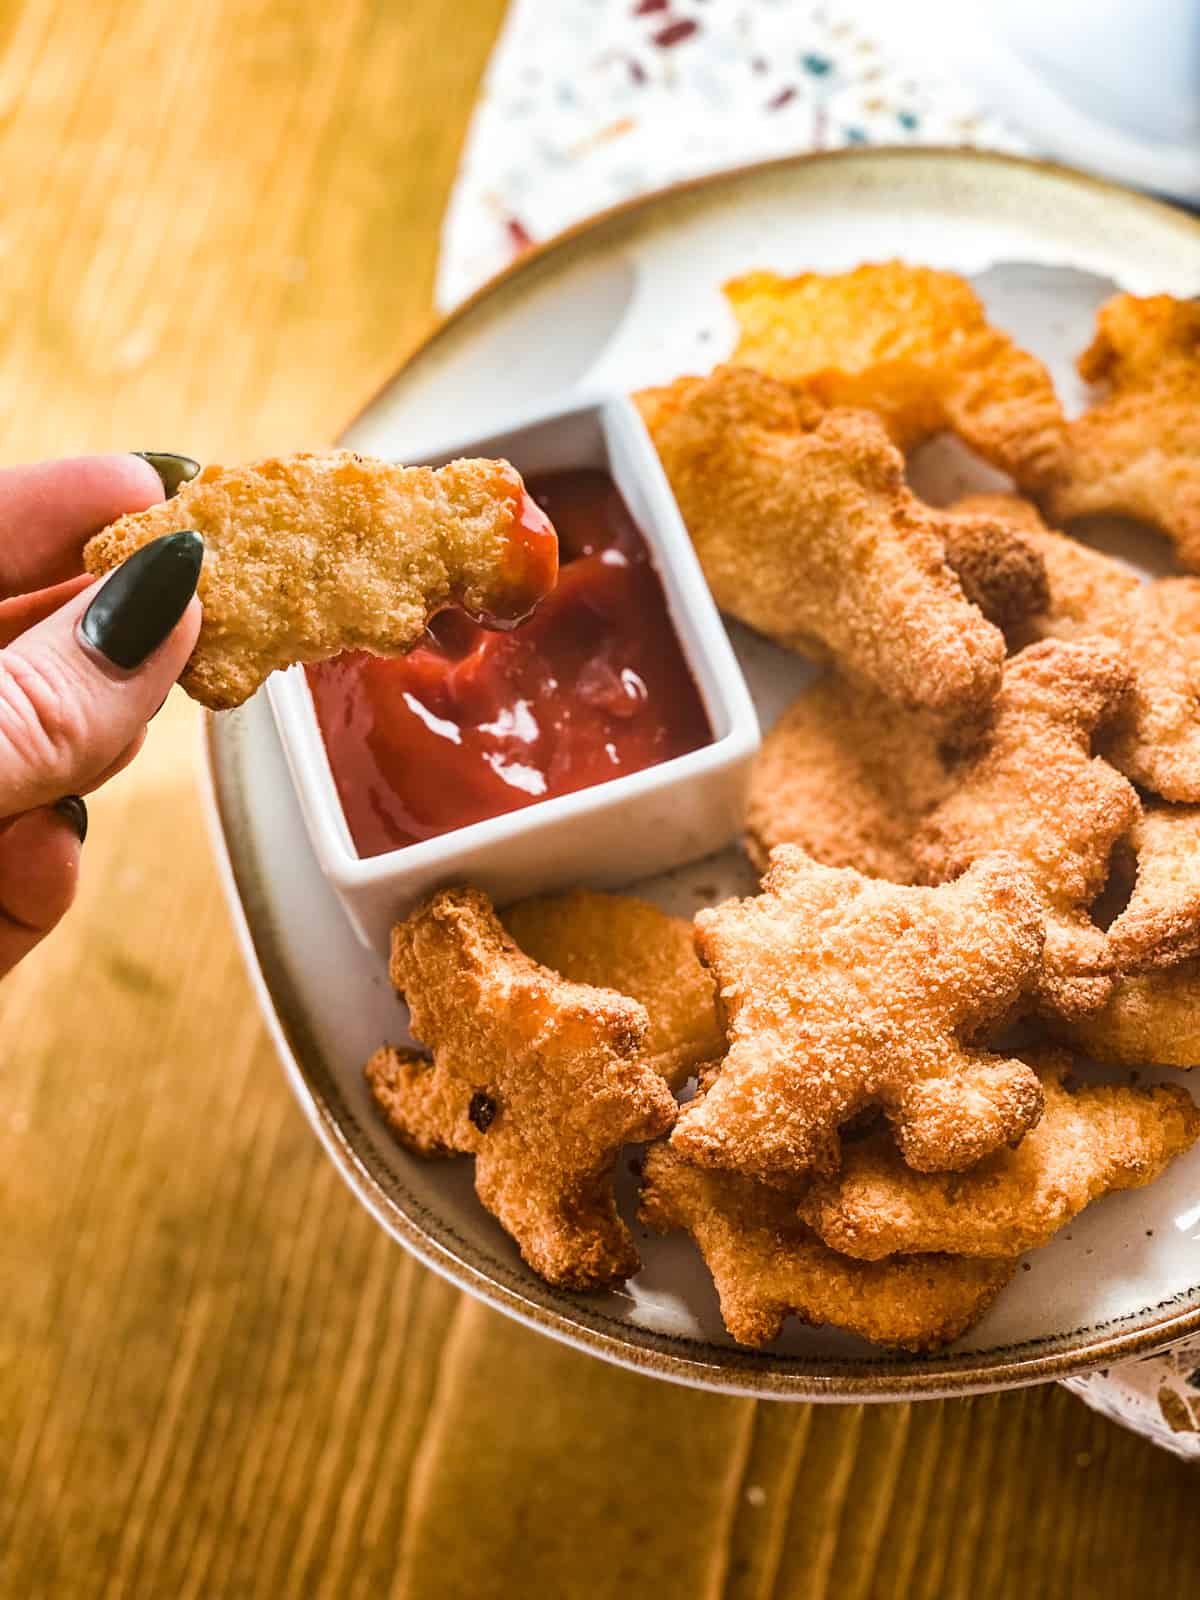 Dino nuggets air fryer style being dipped in ketchup